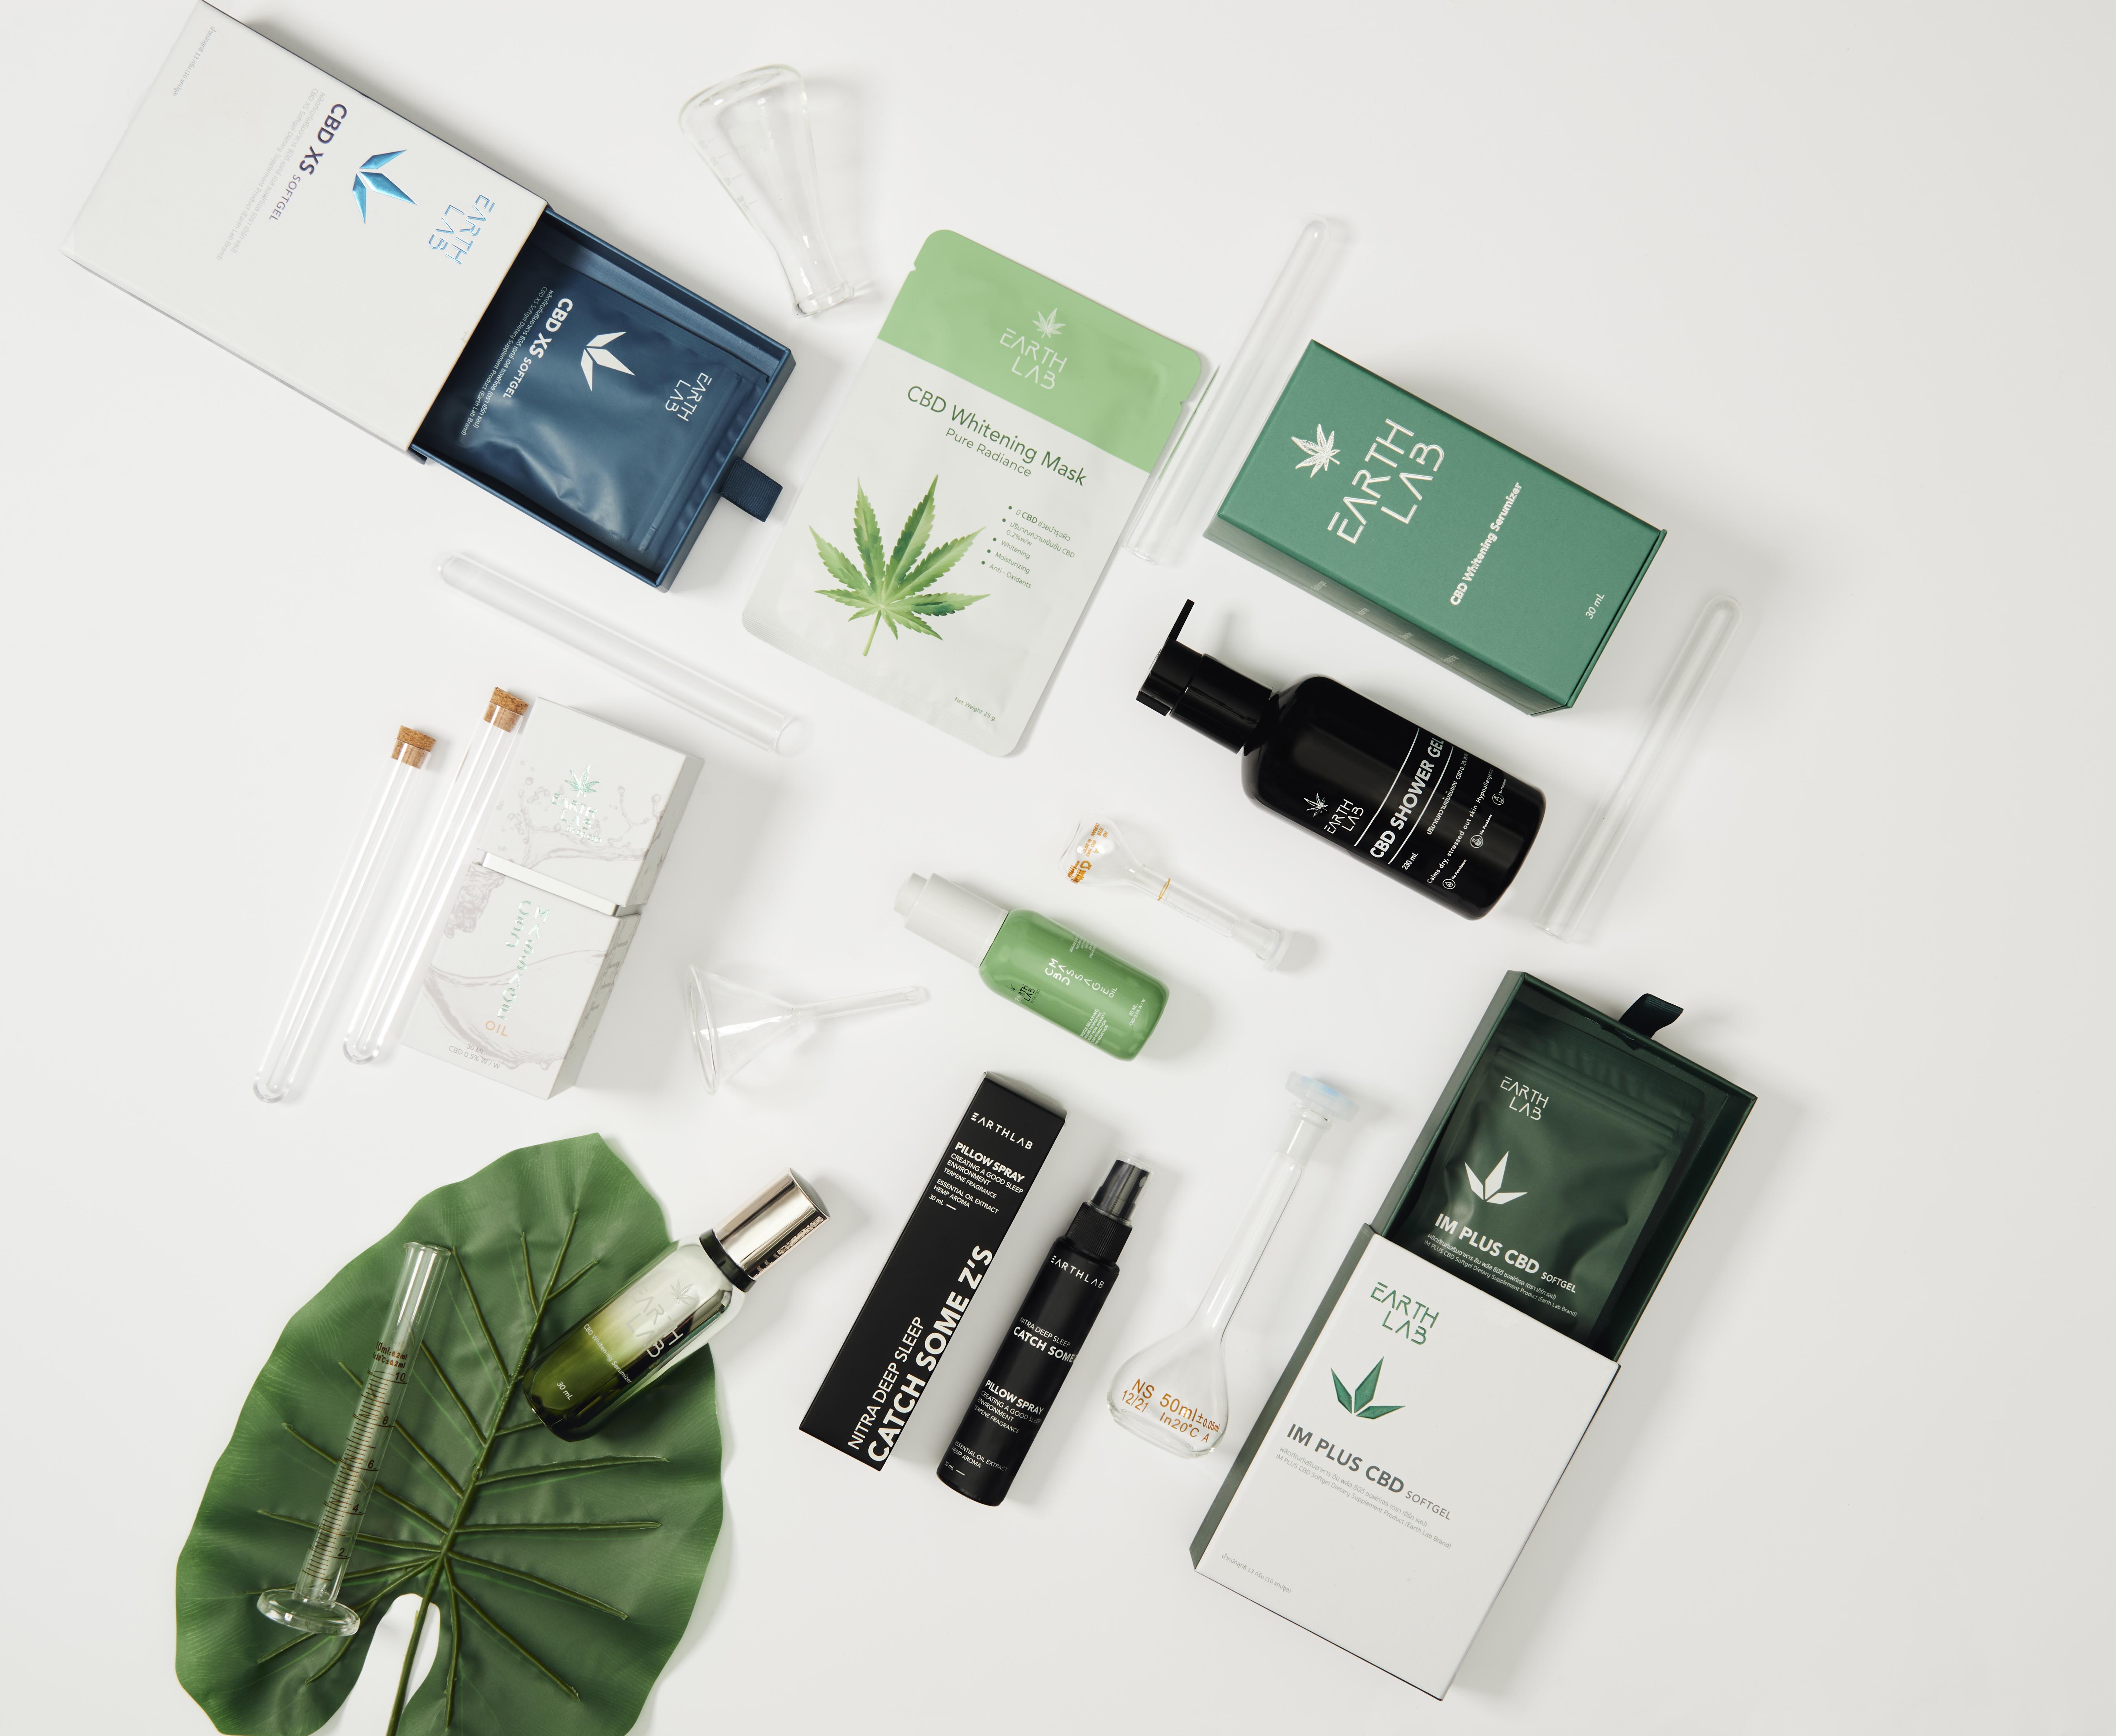 Pain relief products from Dr. CBD